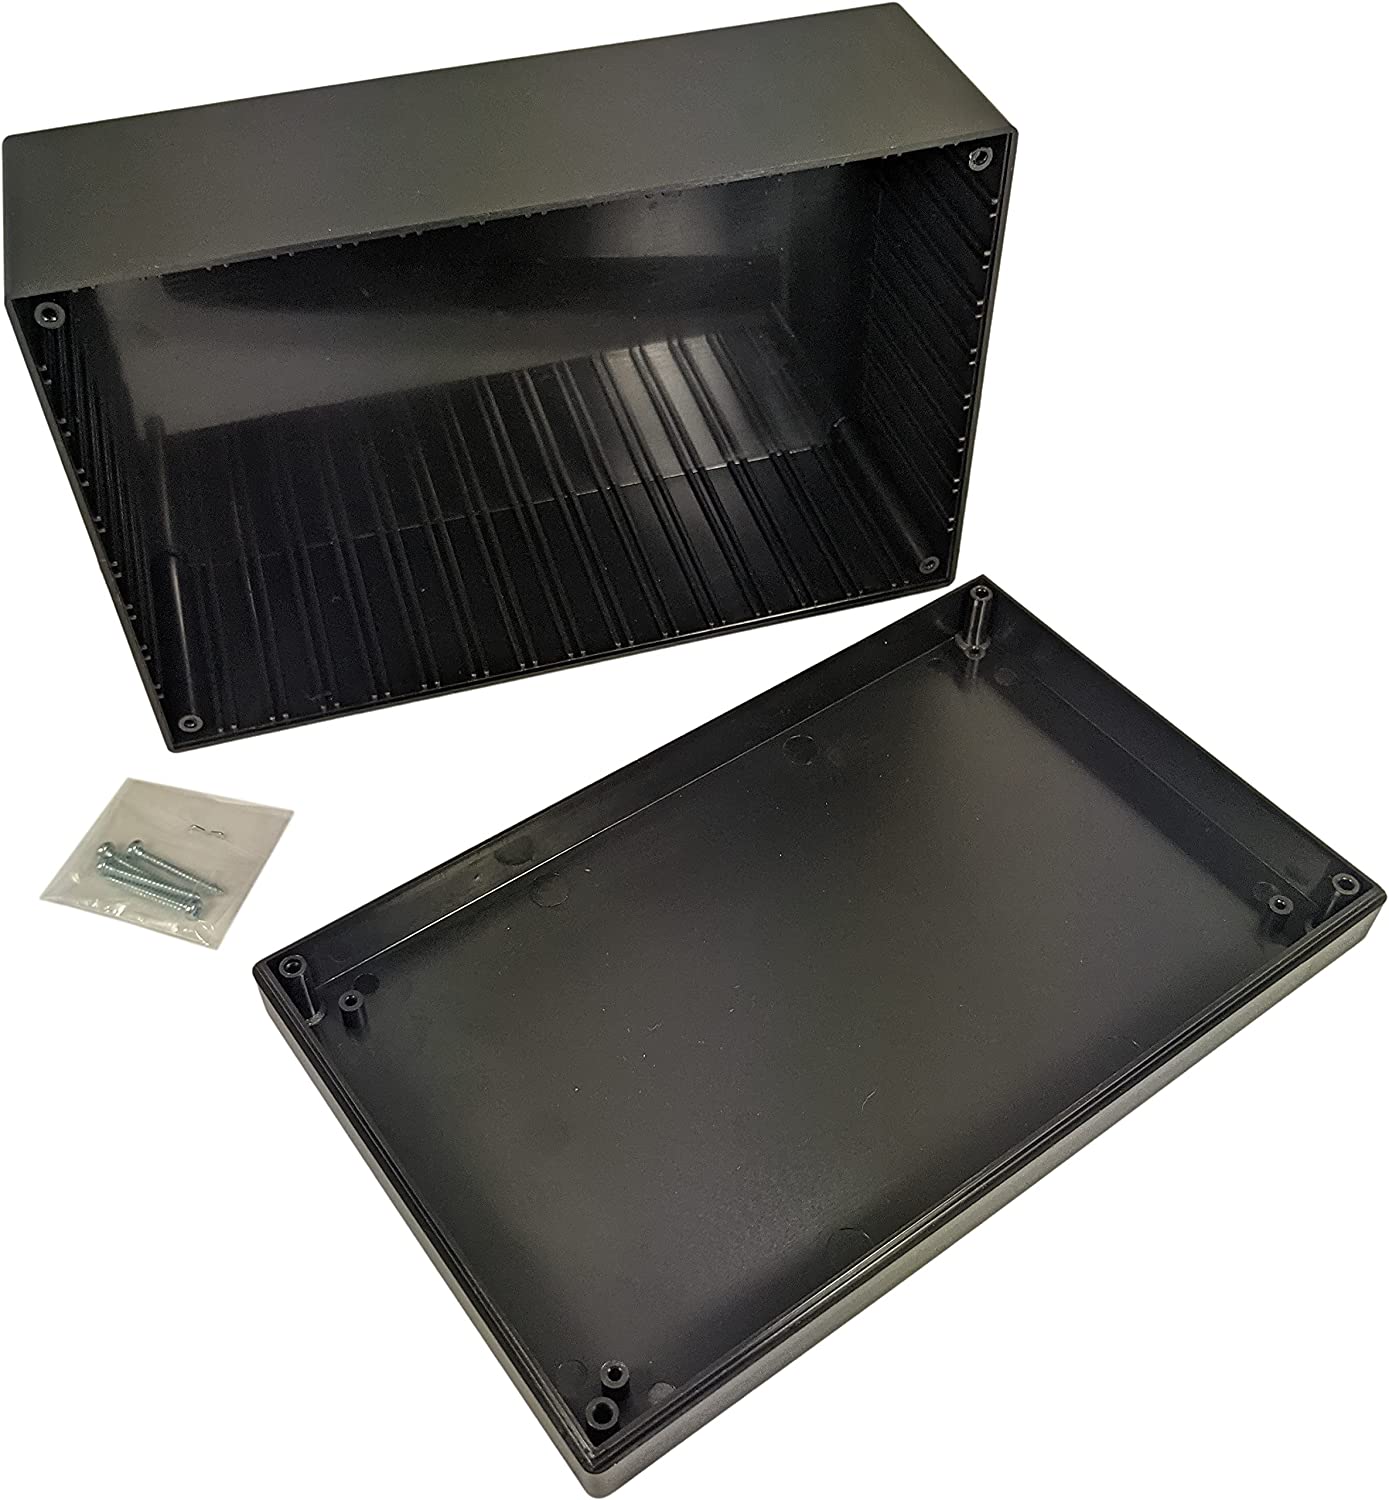 Black ABS Plastic Enclosure Project Box with Lid and Screws, 8.82